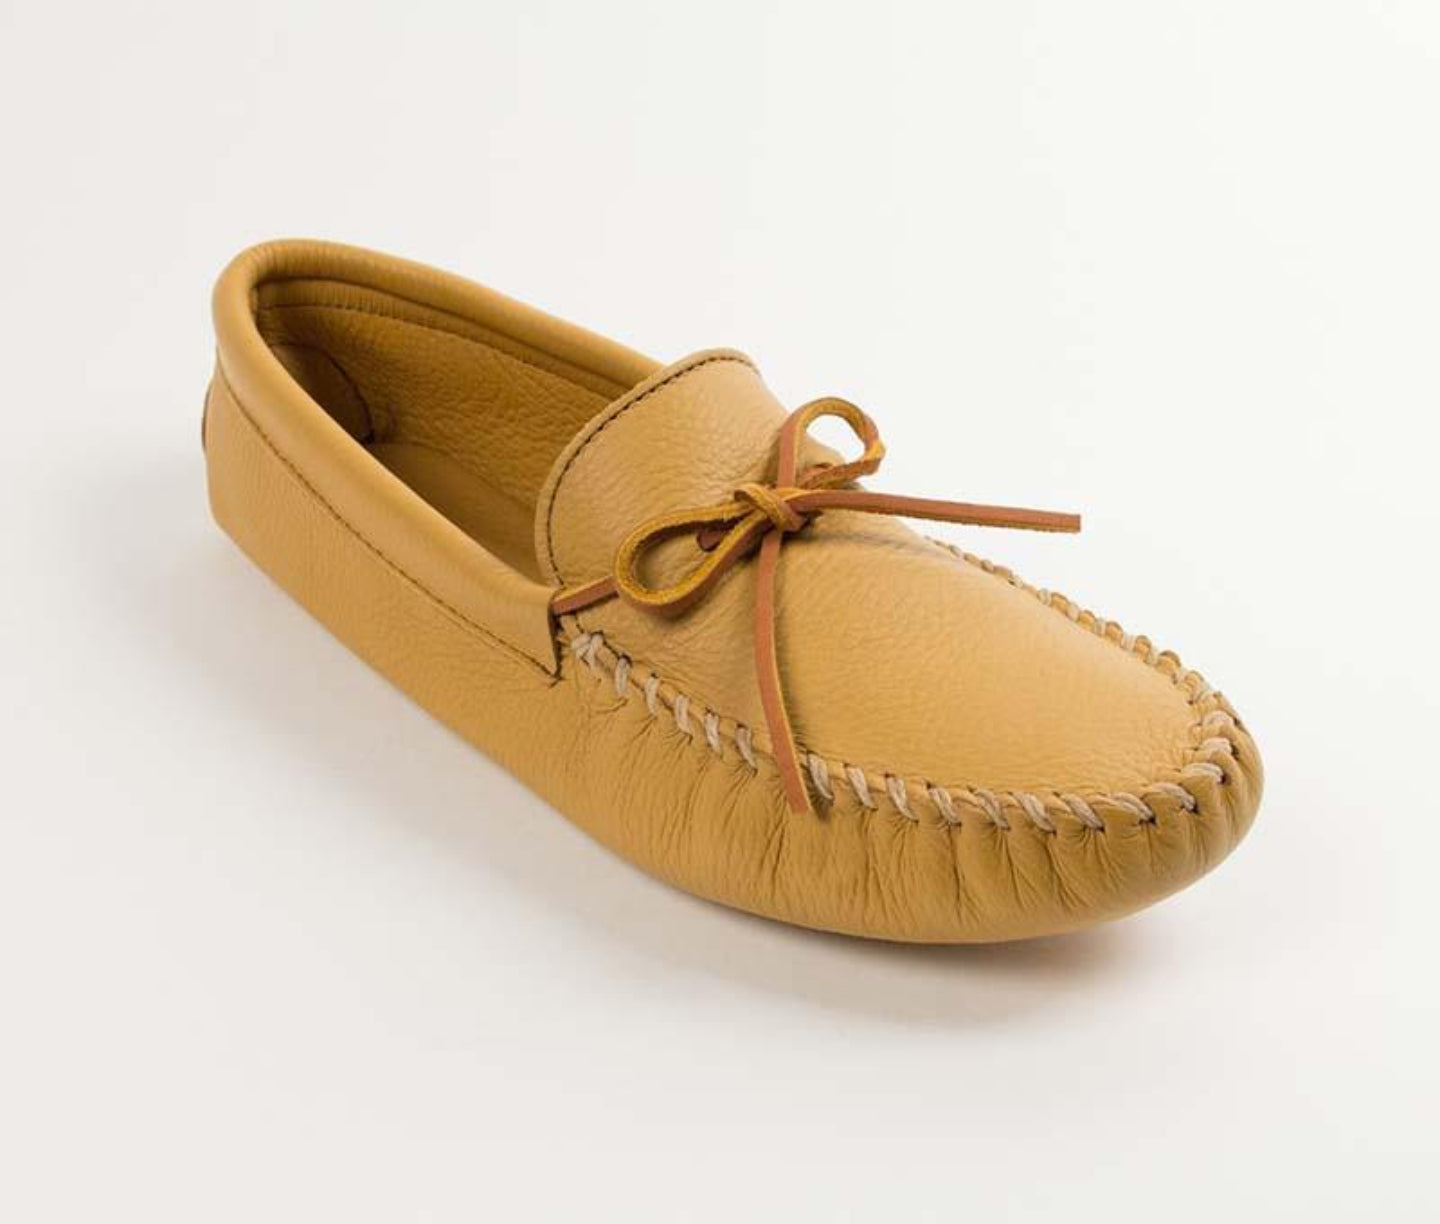 Double Deerskin Softsole Moccasin in Natural from 3/4 Angle View